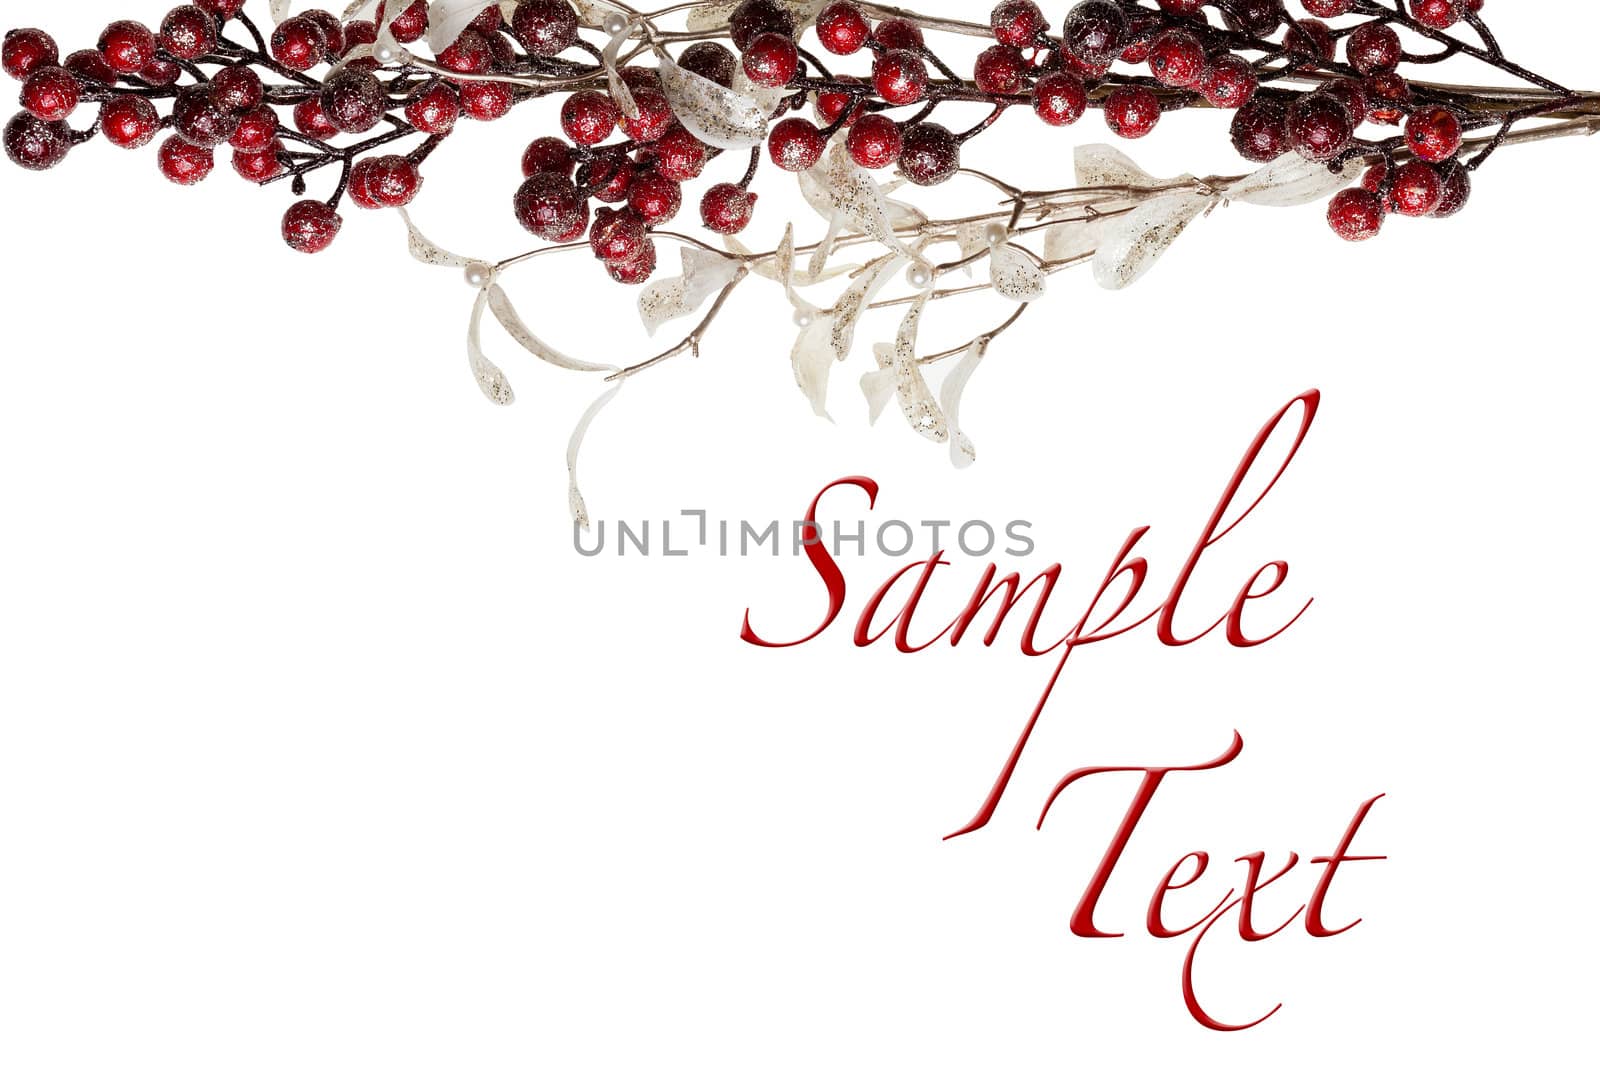 Sparkly Red Berries and Silver Glitter Pearl Leaves Border by scheriton